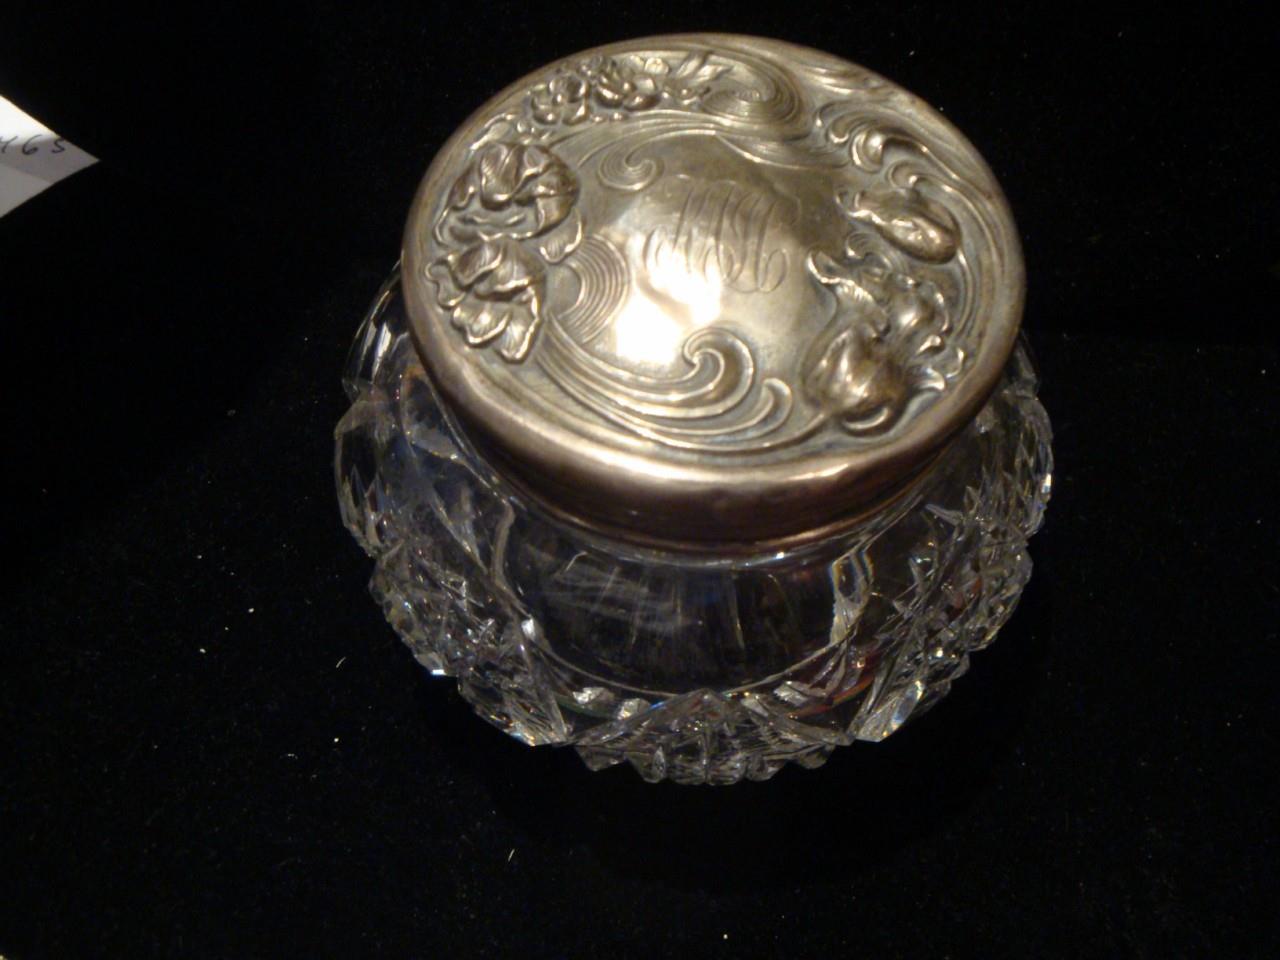 The Following Item we are Offering is An Outstanding Museum Quality Handcut  French 19th Century Sterling Silver Vanity Bointaburet Jewelry Box, stamped Sterling!! Original Price $1500. From an  Important New York Estate. Truly a Rare Find!! Don't